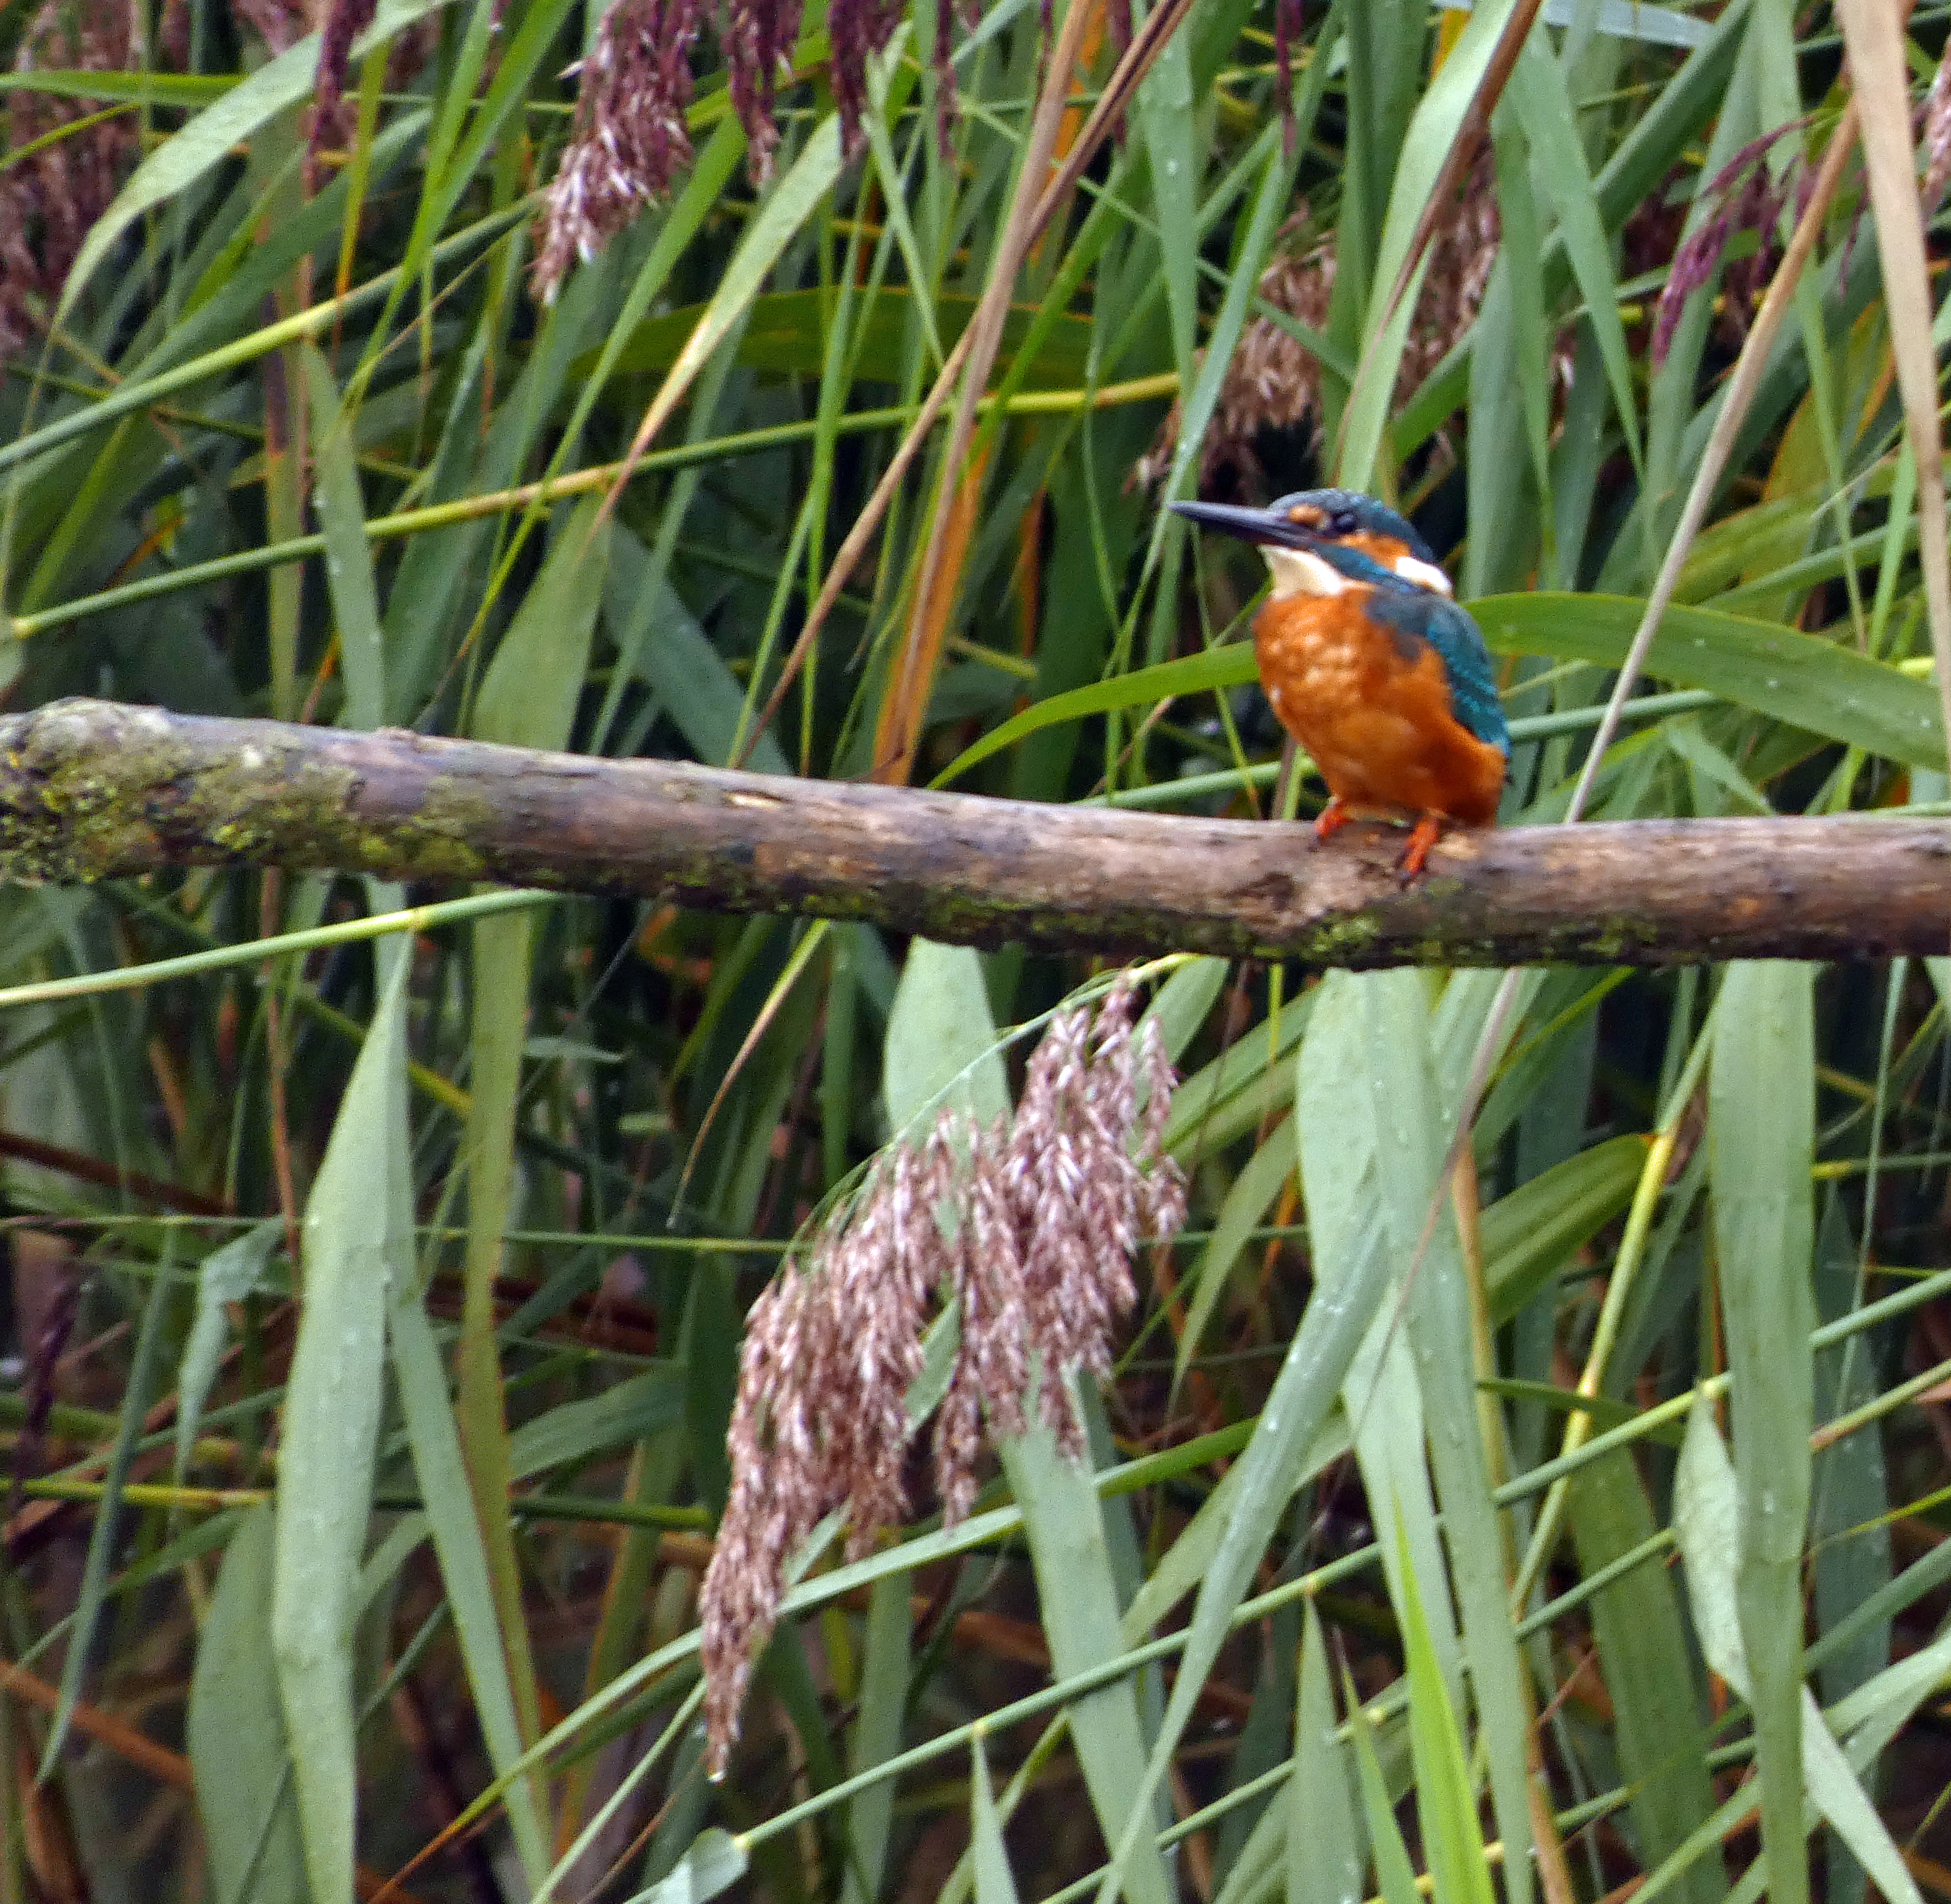 Kingfisher, Rodley Nature Reserve, 6th September 2022